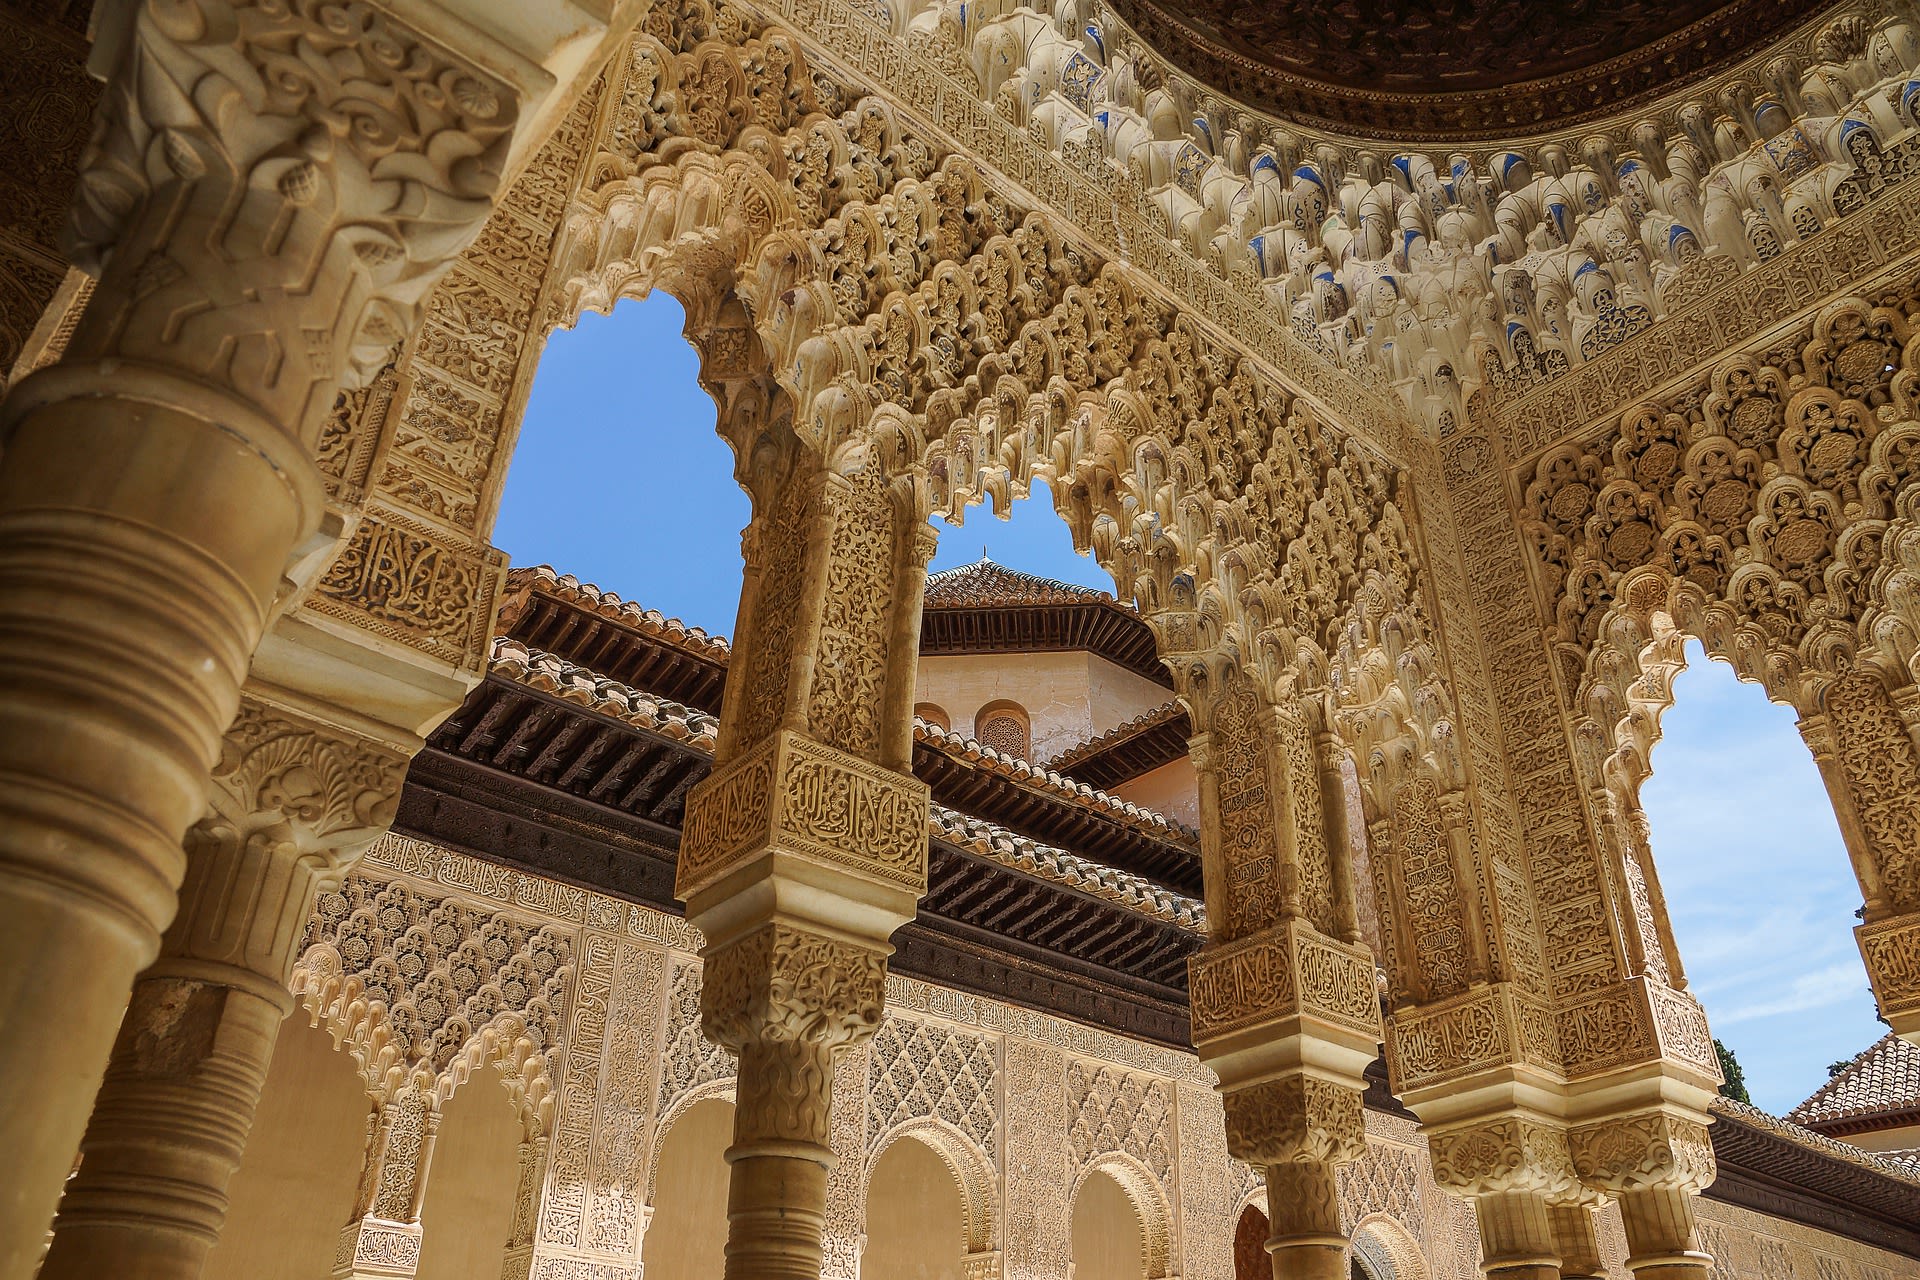 parts of intricate architectural features inside the Alhambra Palace